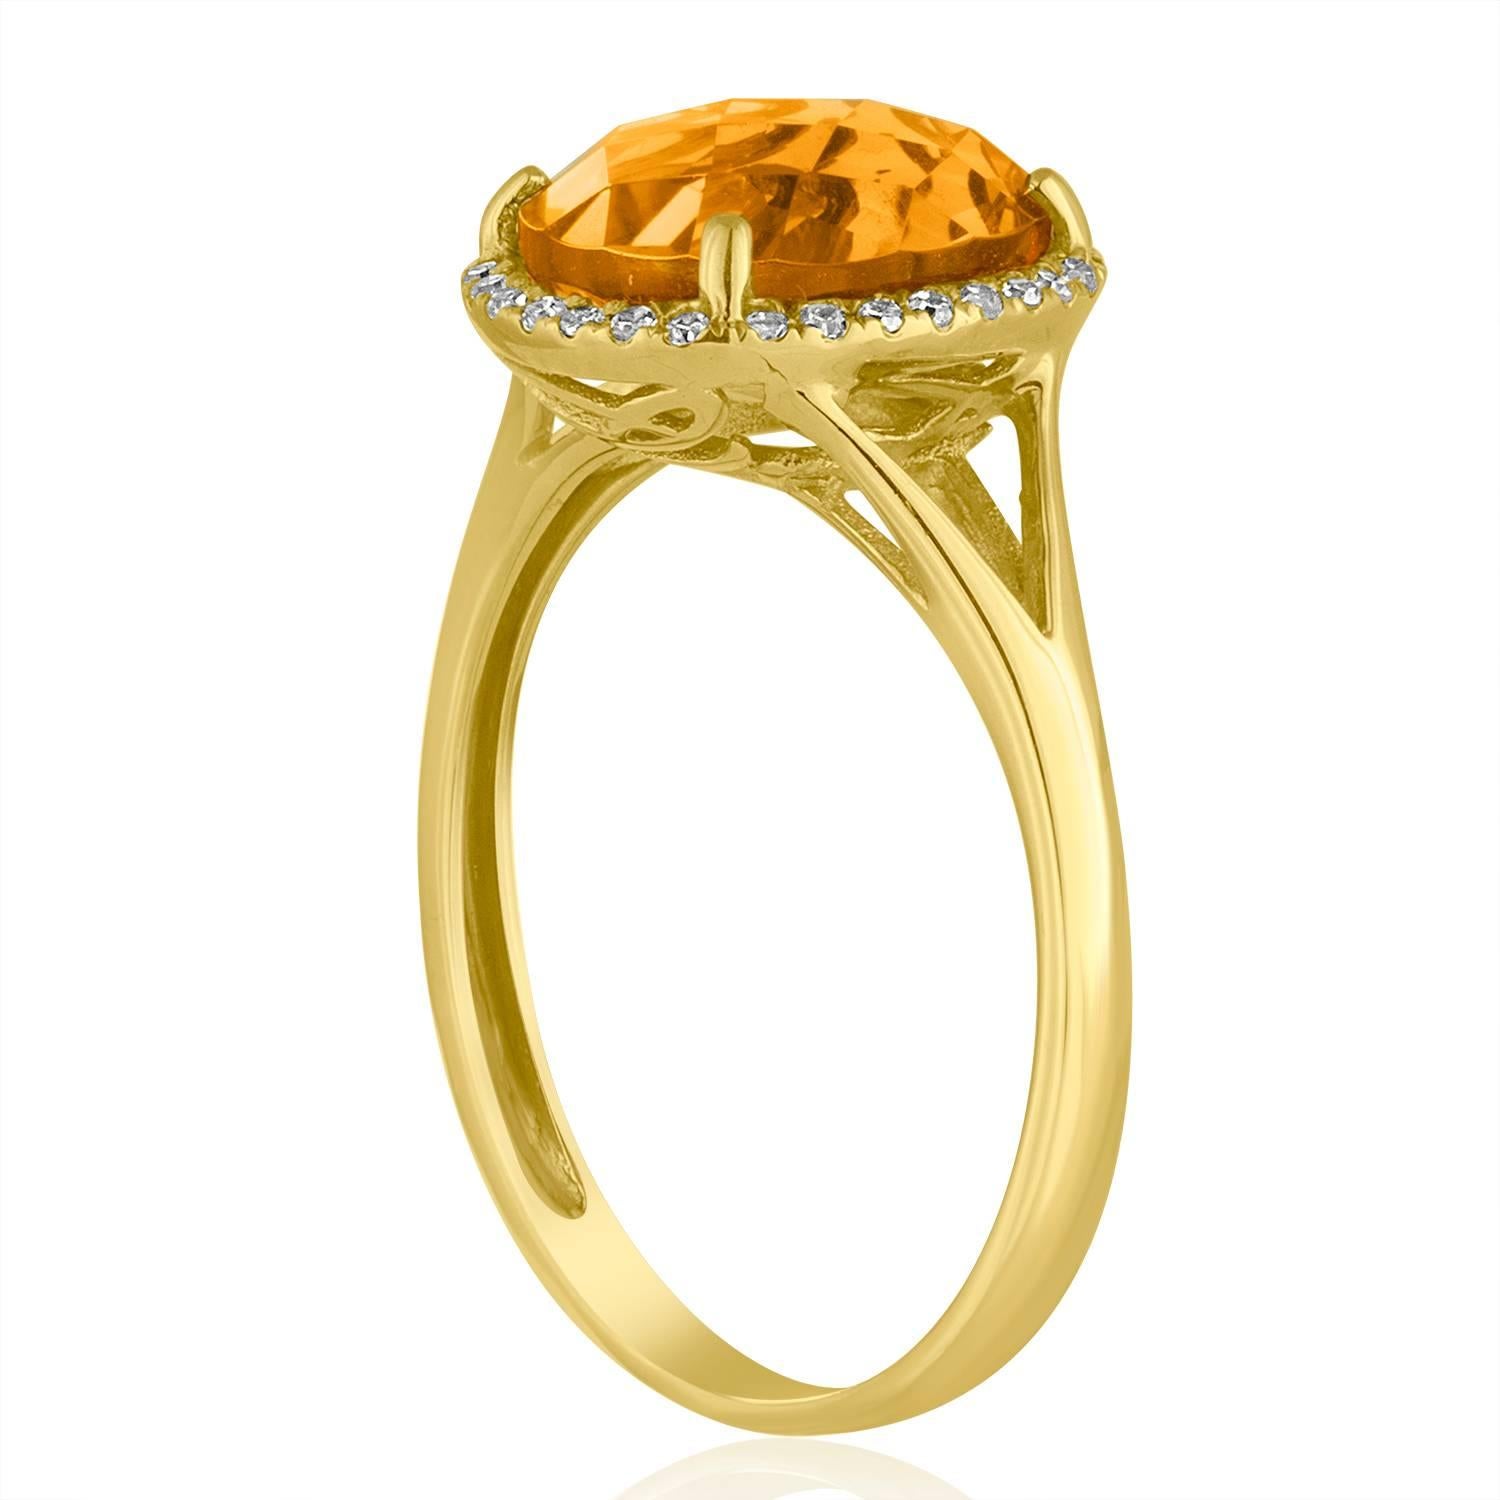 Beautifully and Fun Ring
The ring is 14K Yellow Gold
There are 0.11 Carats In Diamonds G/H SI
The Center Stone is an Oval Cut Citrine 2.47 Carats
The ring measures on top 6/16